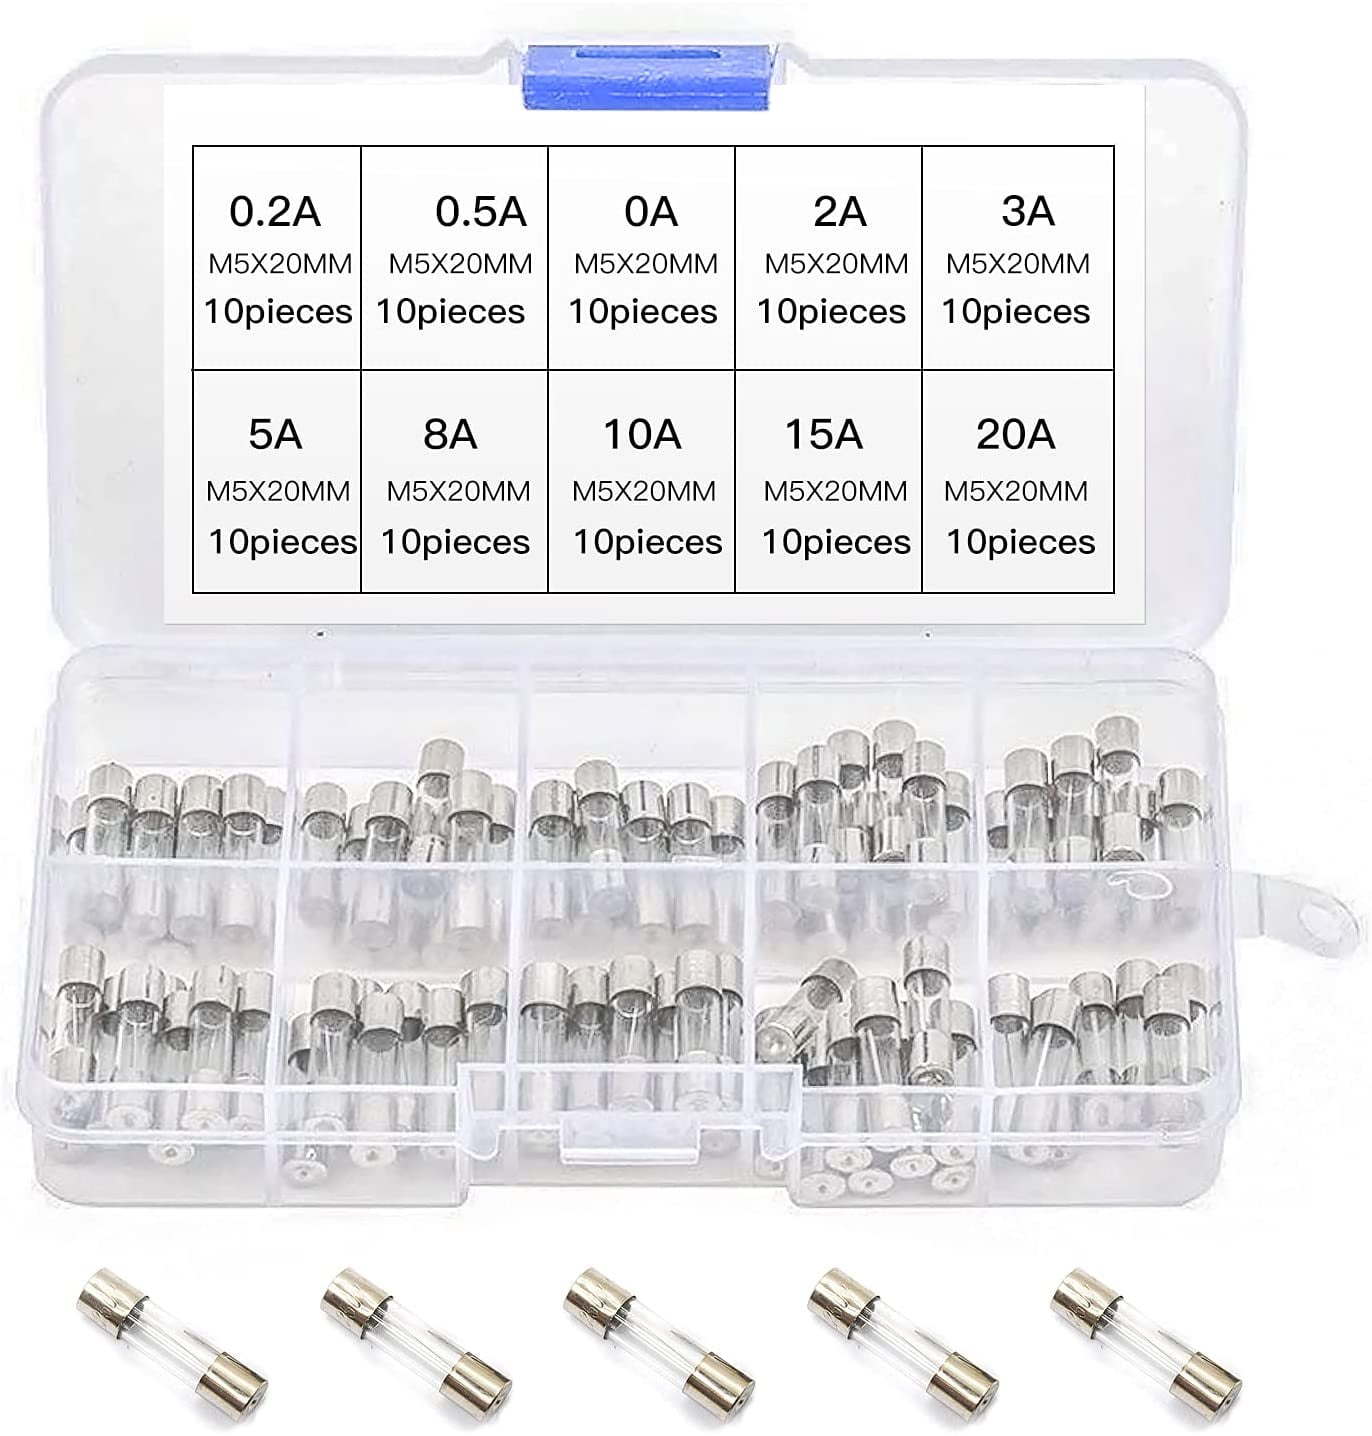 BULK FUSES Small Glass FUSE assortment pack 100pcs Variety pack 5x20 mm 